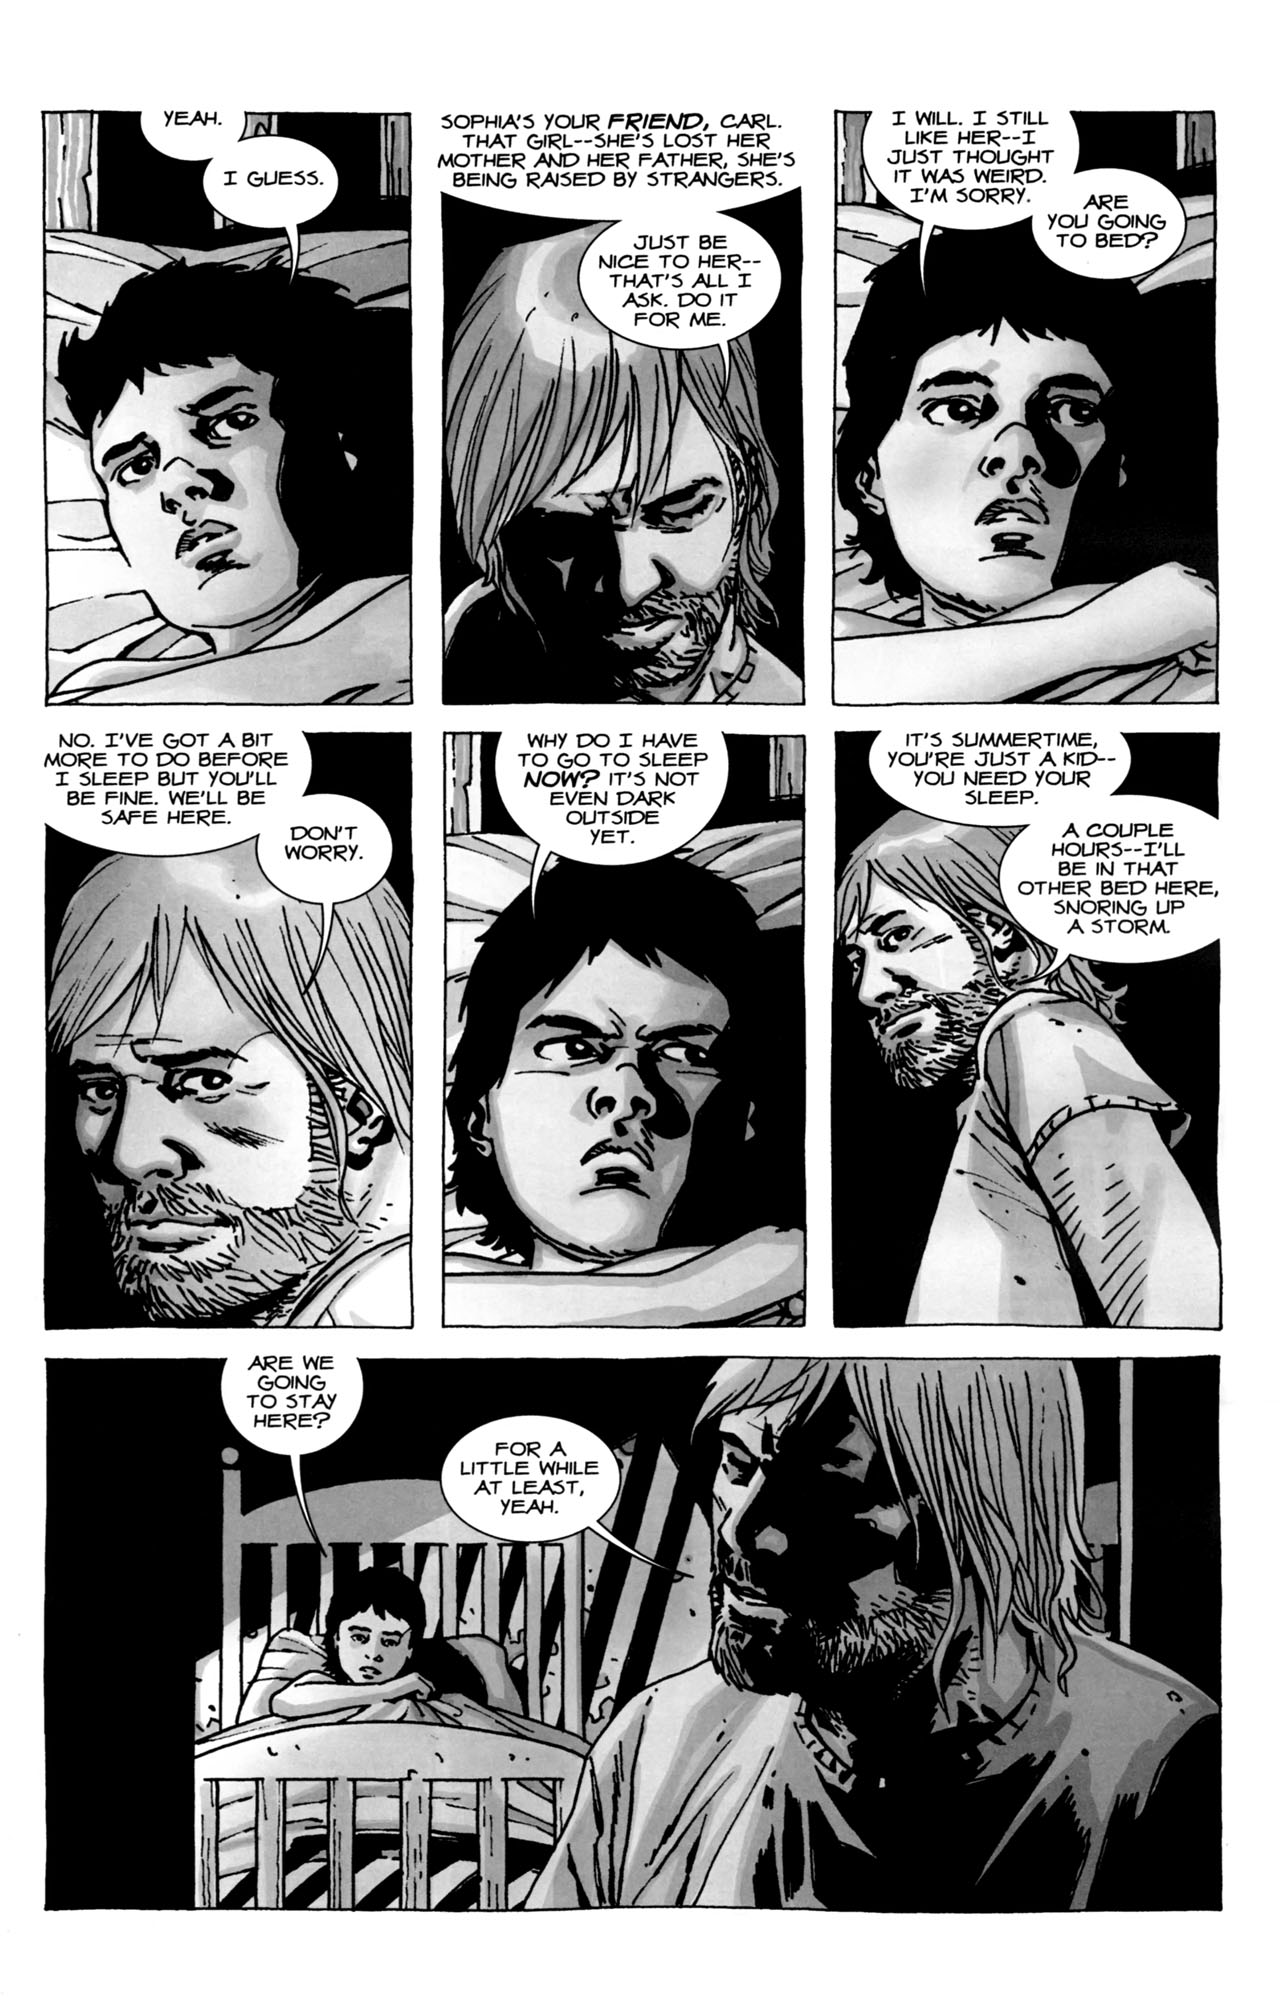 walking dead little girl comic - Yeah. N I Guess. Sophia'S Your Friend, Carl. That GirlShe'S Lost Her Mother And Her Father, She'S Being Raised By Strangers. I Will. I Still HerI Just Thought It Was Weird. I'M Sorry. Are You Going To Bed? Just Be Nice To 